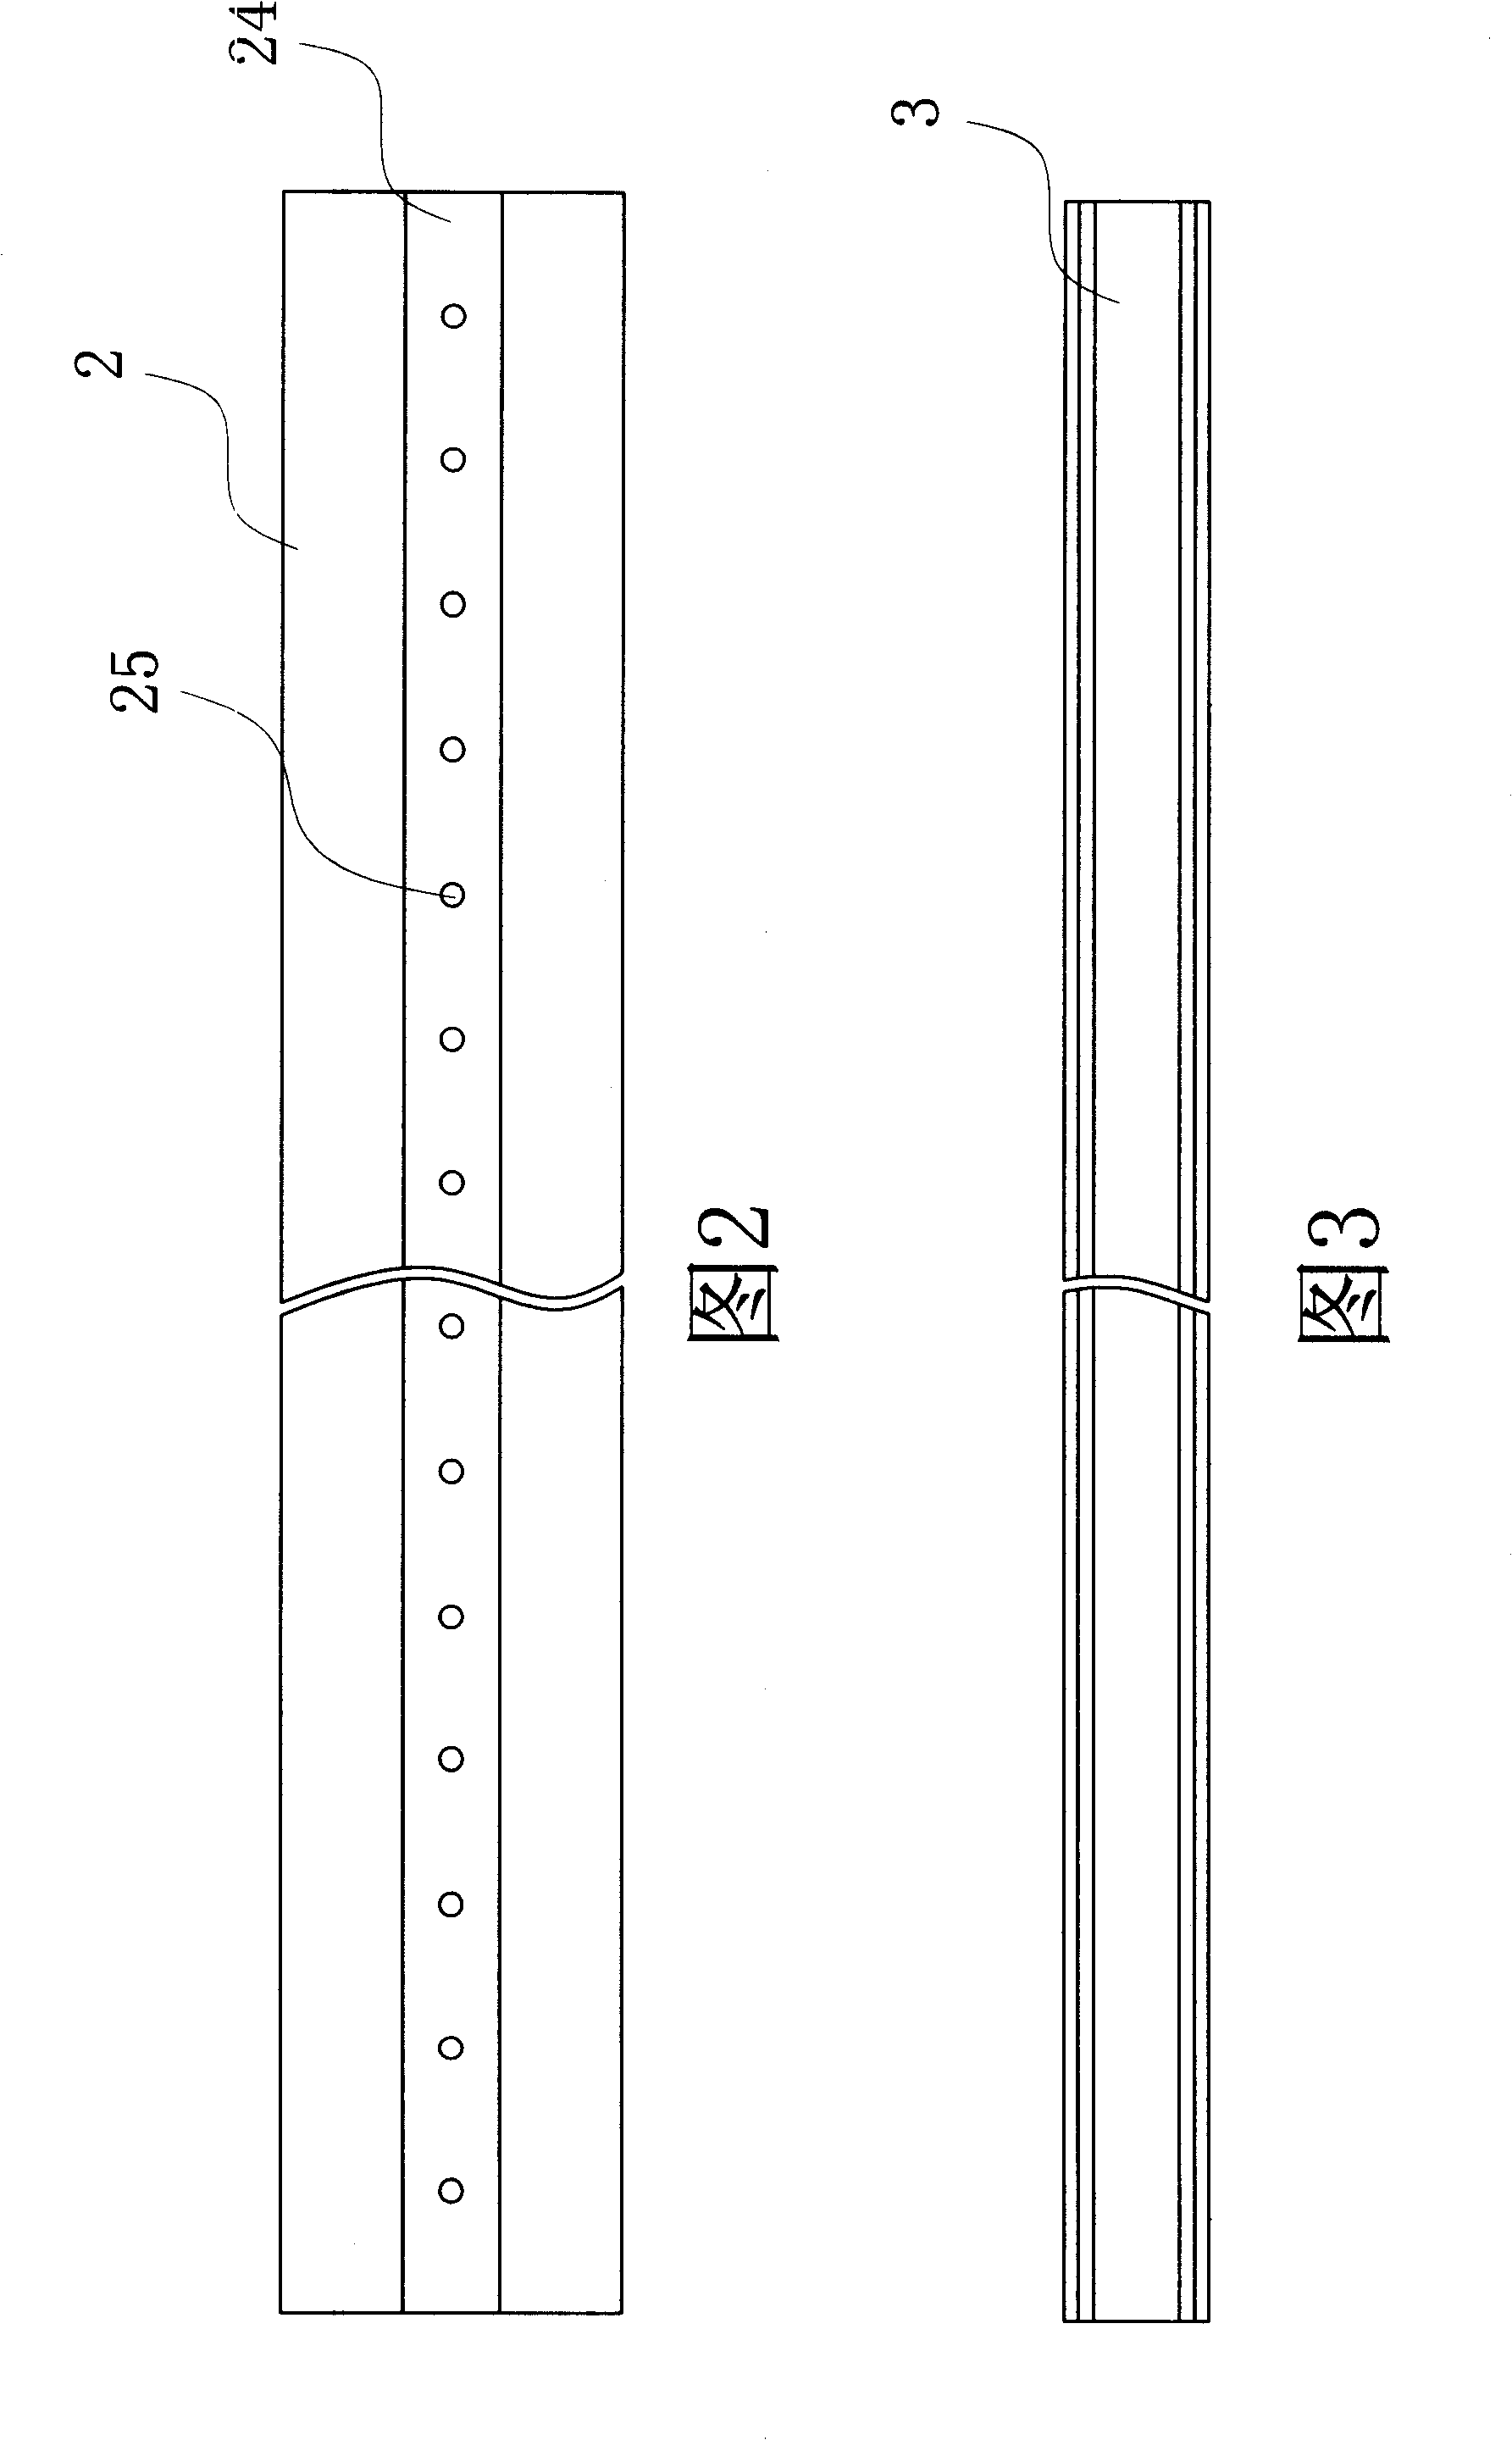 Root irrigation and root irrigation system